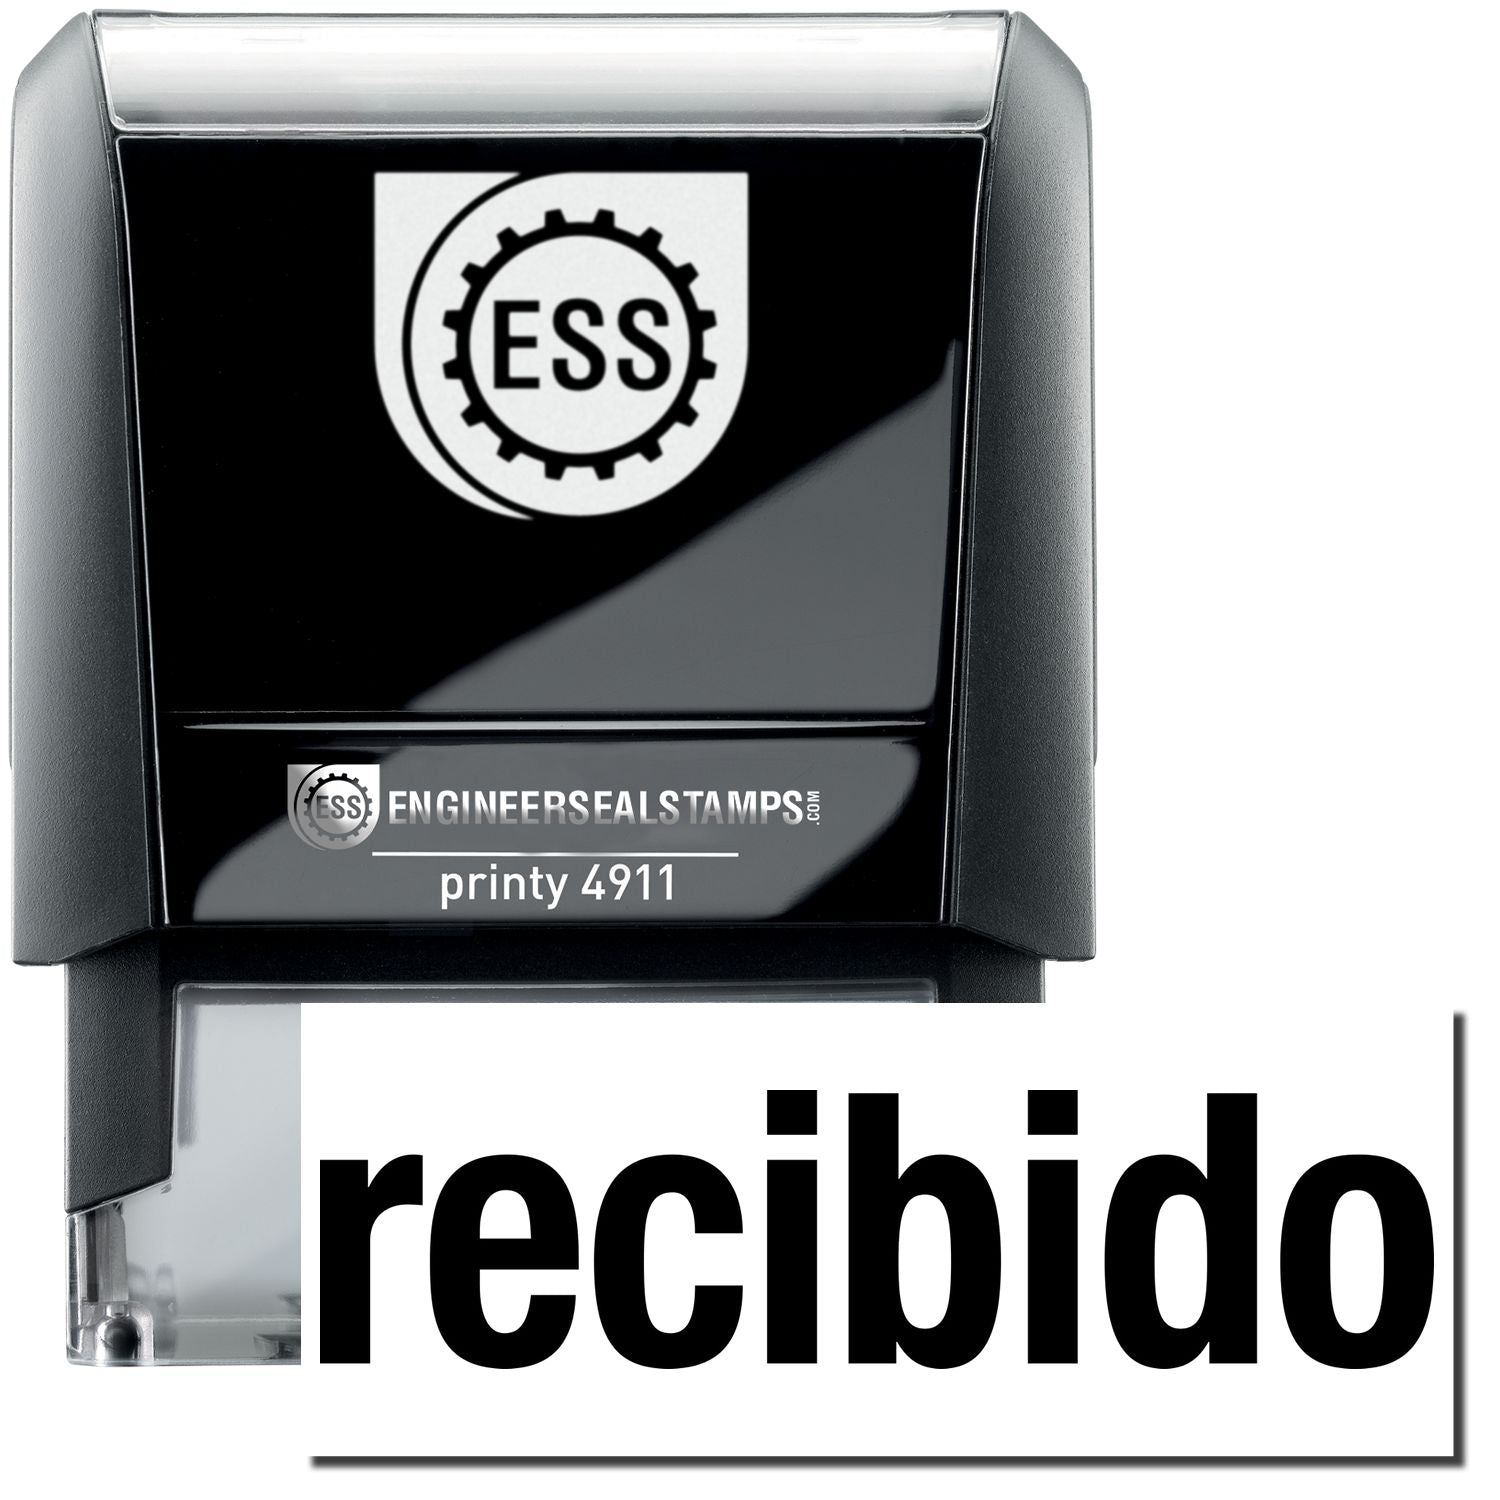 A self-inking stamp with a stamped image showing how the text "recibido" in bold font is displayed after stamping.